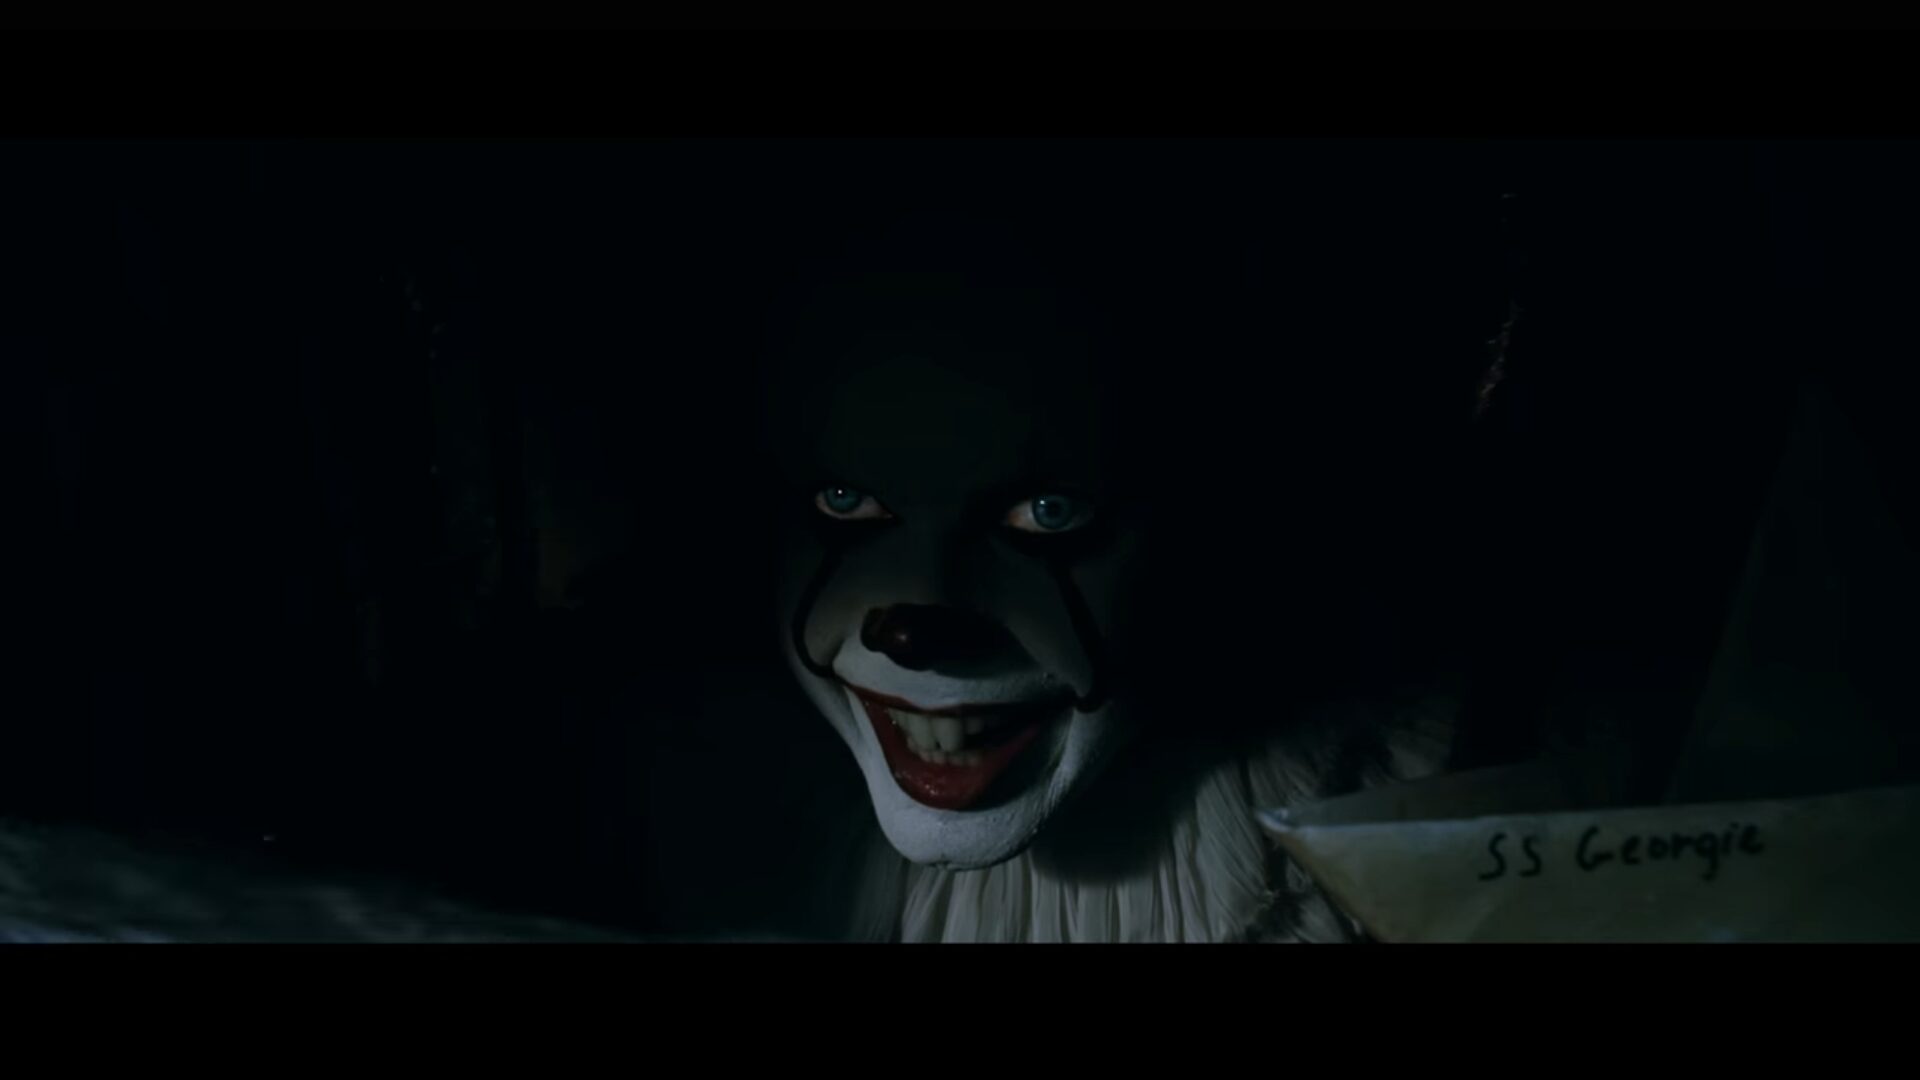 Pennywise Speaks in the New “IT” Trailer